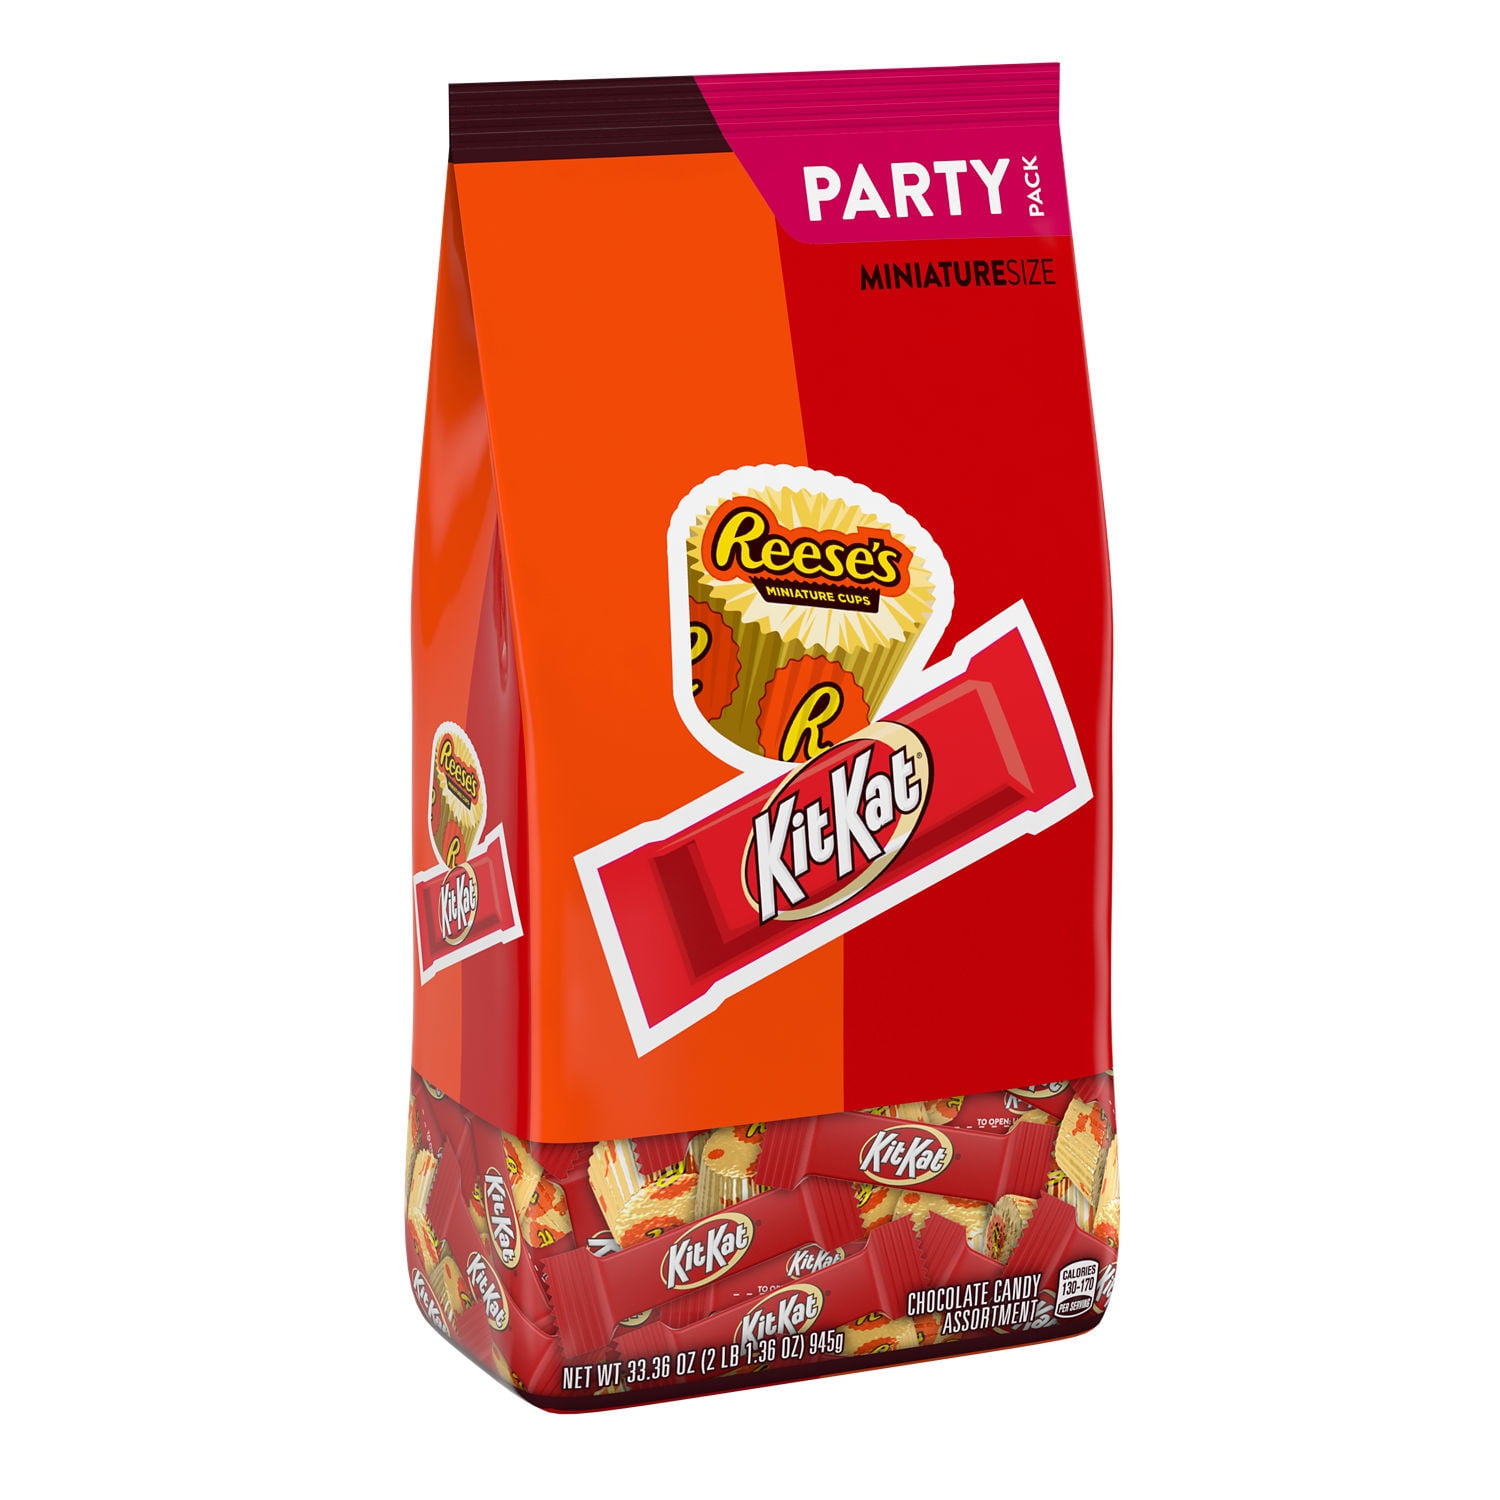 REESE'S and KIT KAT Milk Chocolate Assortment Miniature Size, Easter Candy Bulk Variety Party Pack, 33.36 oz